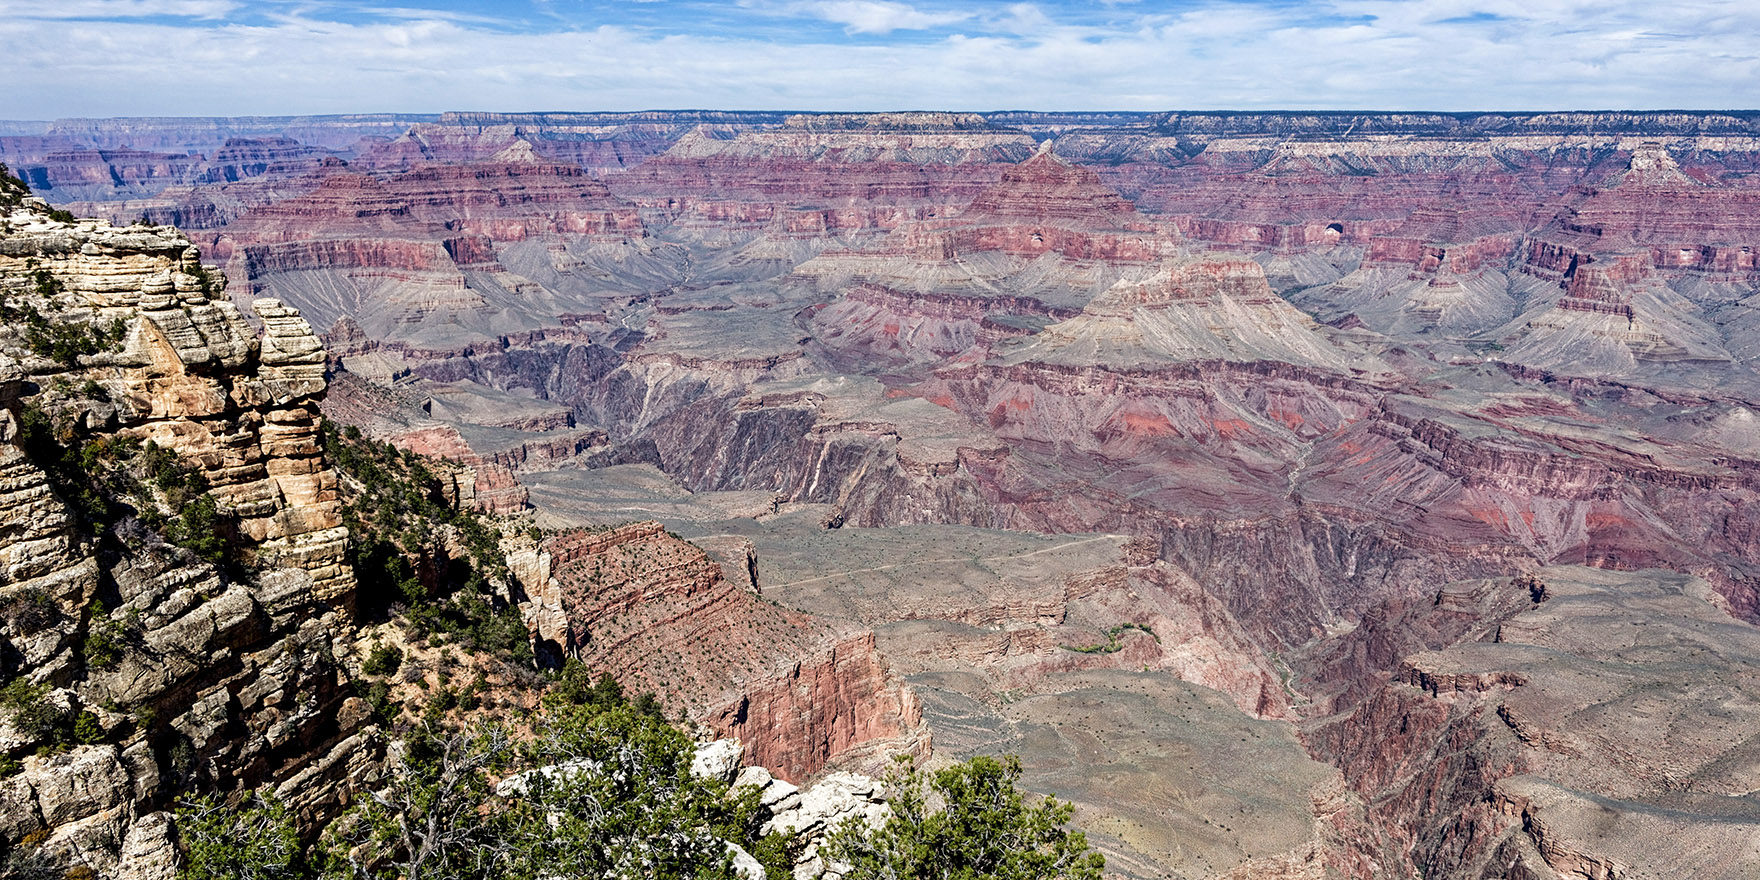 On the Rim Trail near Mather Point